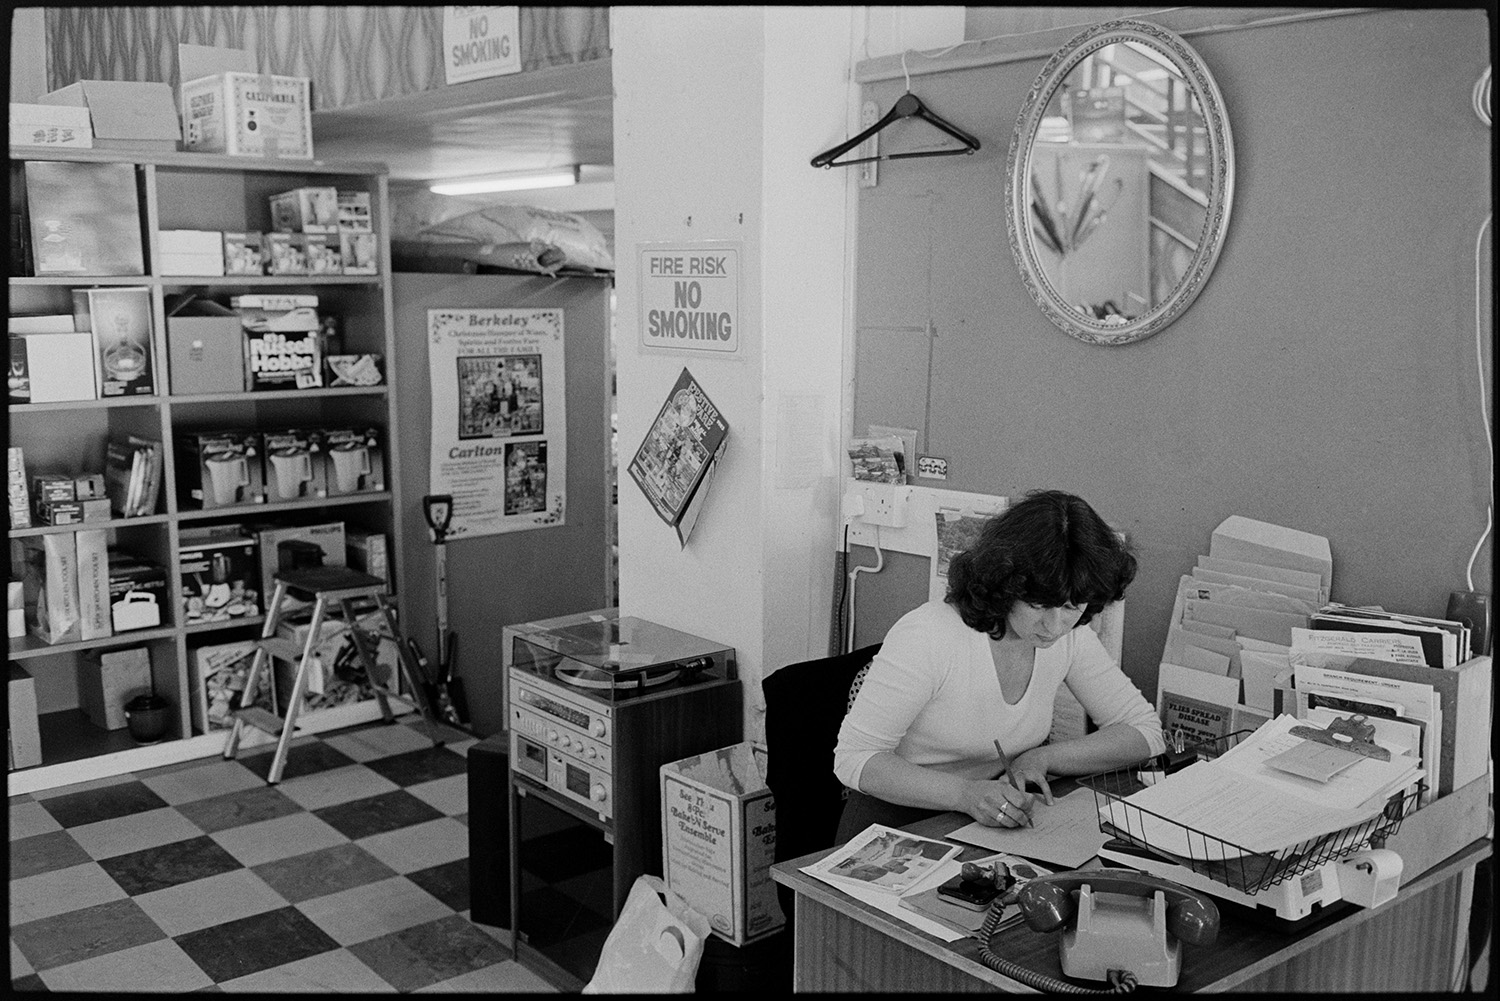 Interior of clothes shop shelves and displays of goods. Woman doing accounts, staircase. 
[A woman working on accounts at a desk in a shop in Buttgarden Street, Bideford. Various files and a telephone are on the desk in front of her. Goods are displayed on shelves in the background, including kettles and a food processor. A record player is also visible behind her desk.]